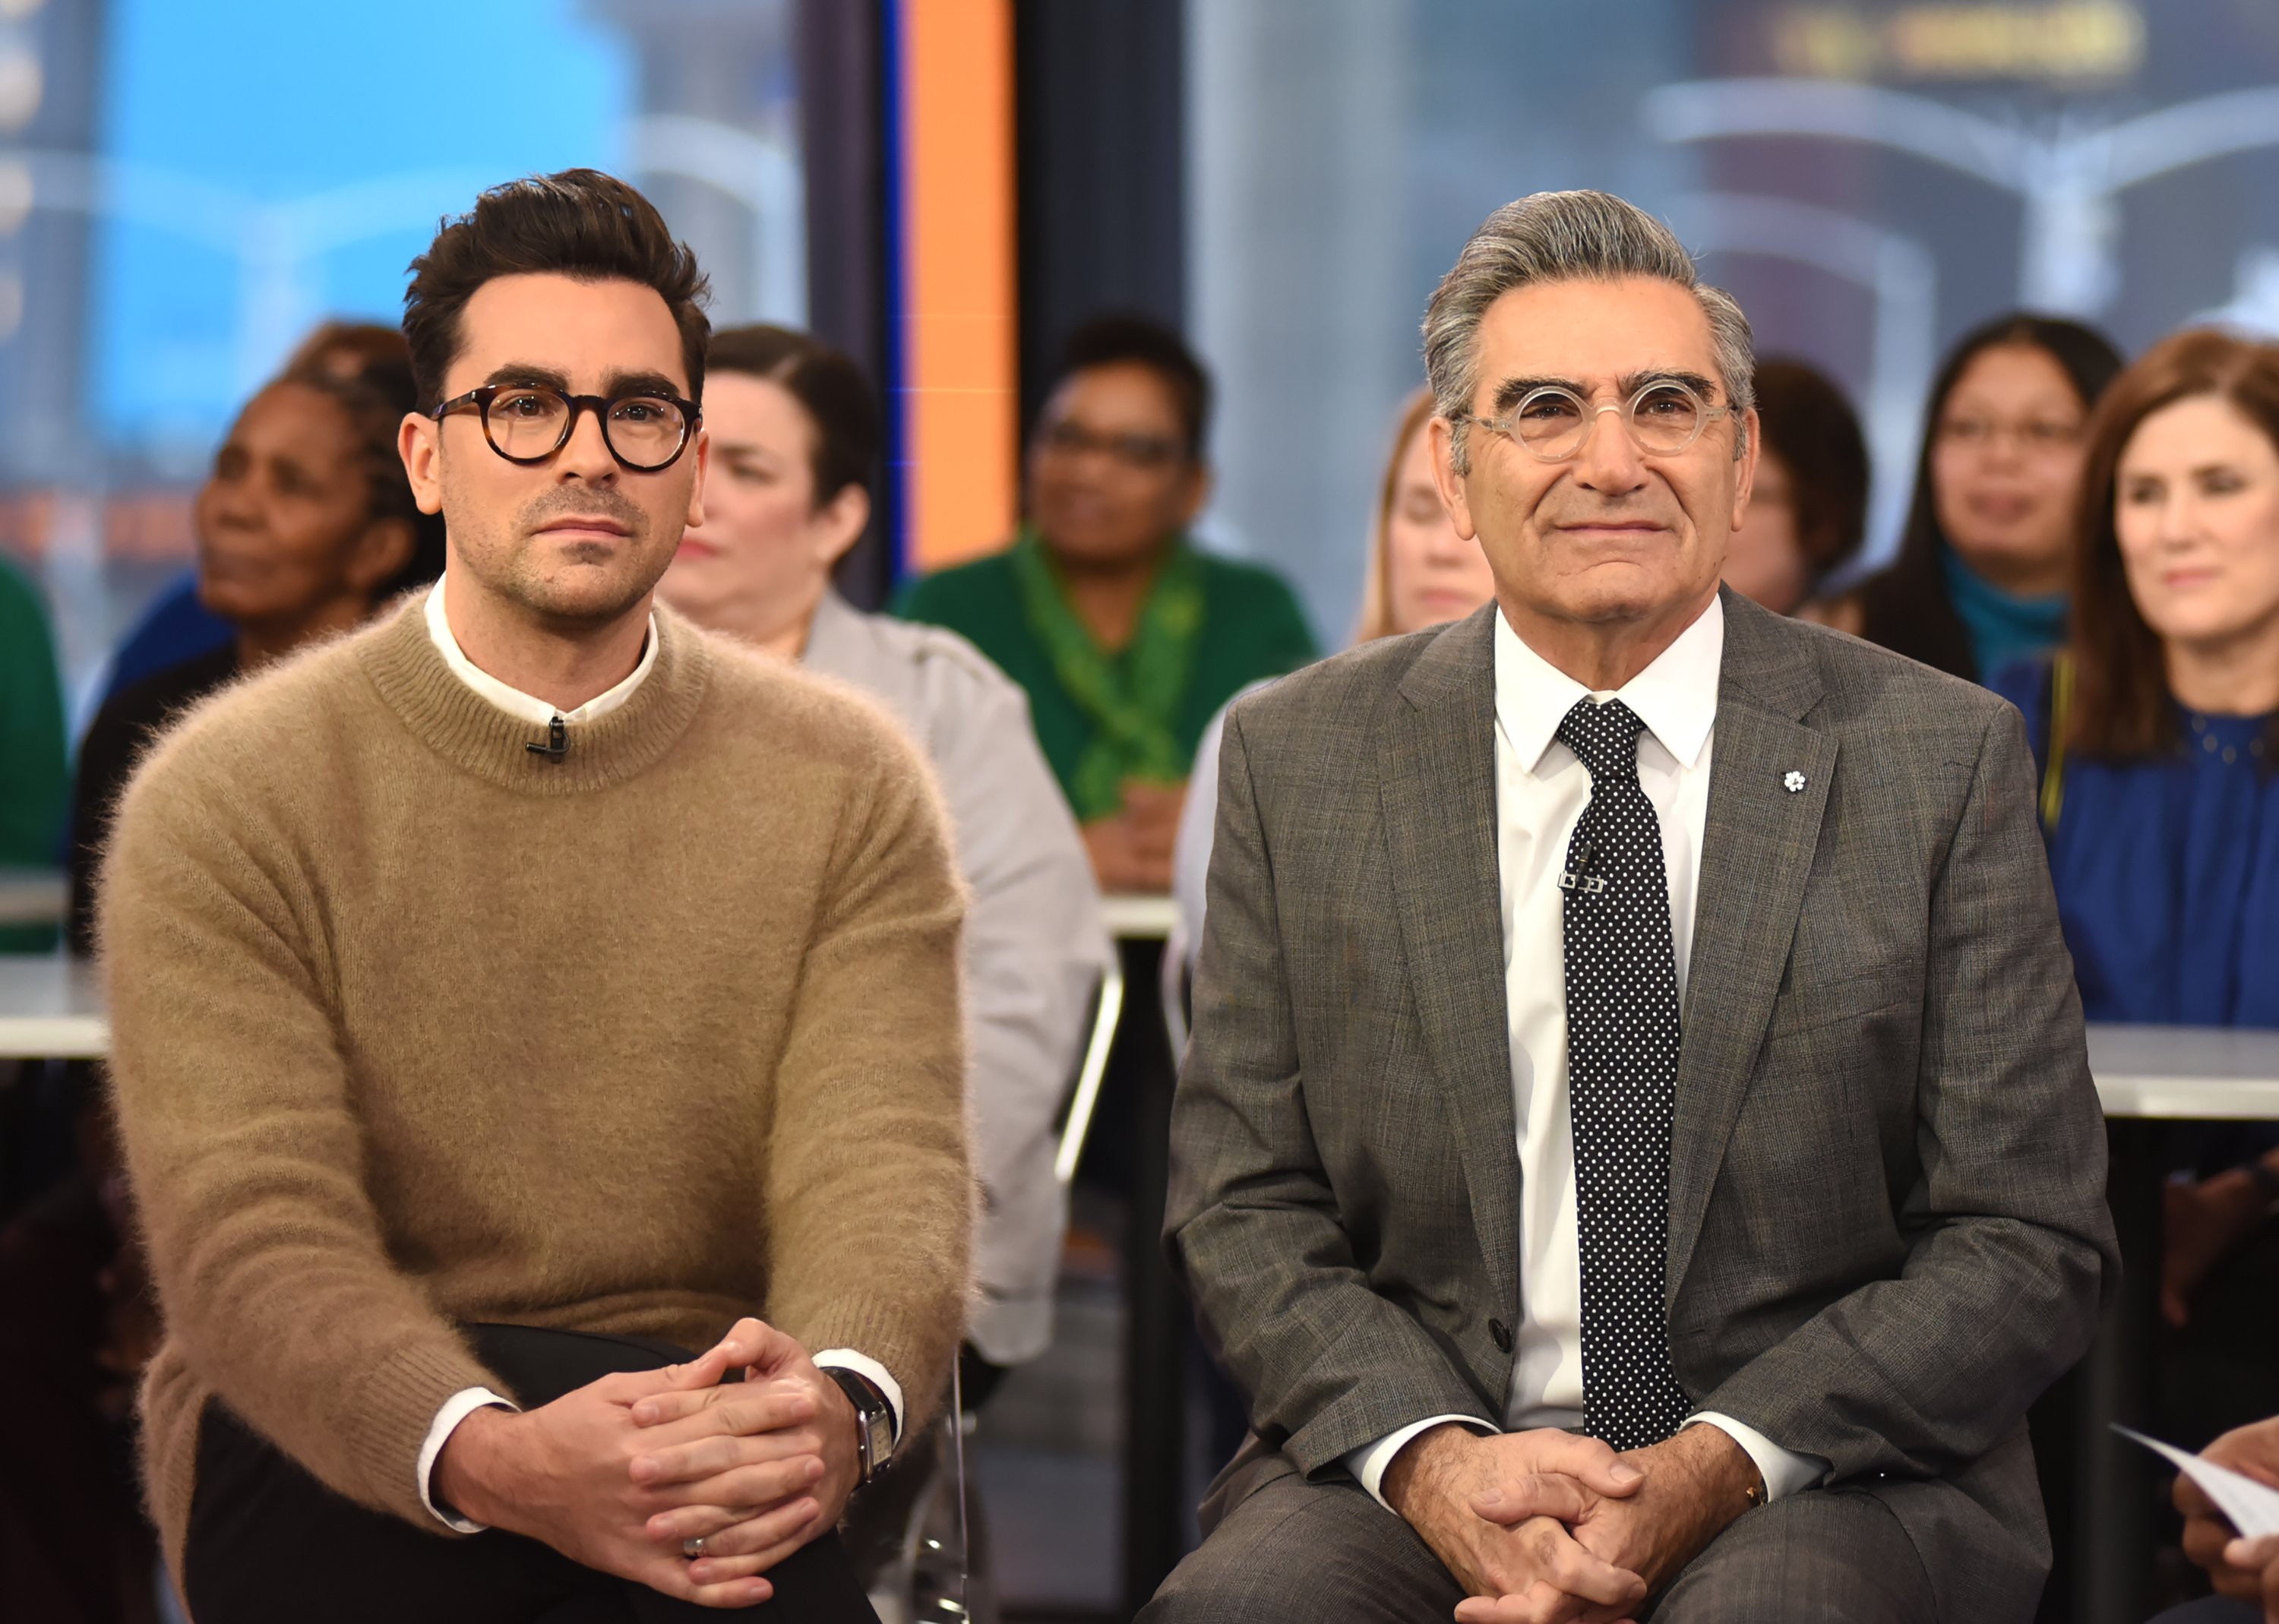 Eugene and Daniel Levy visit "Good Morning America" on January 24, 2018 | Photo: Getty Images